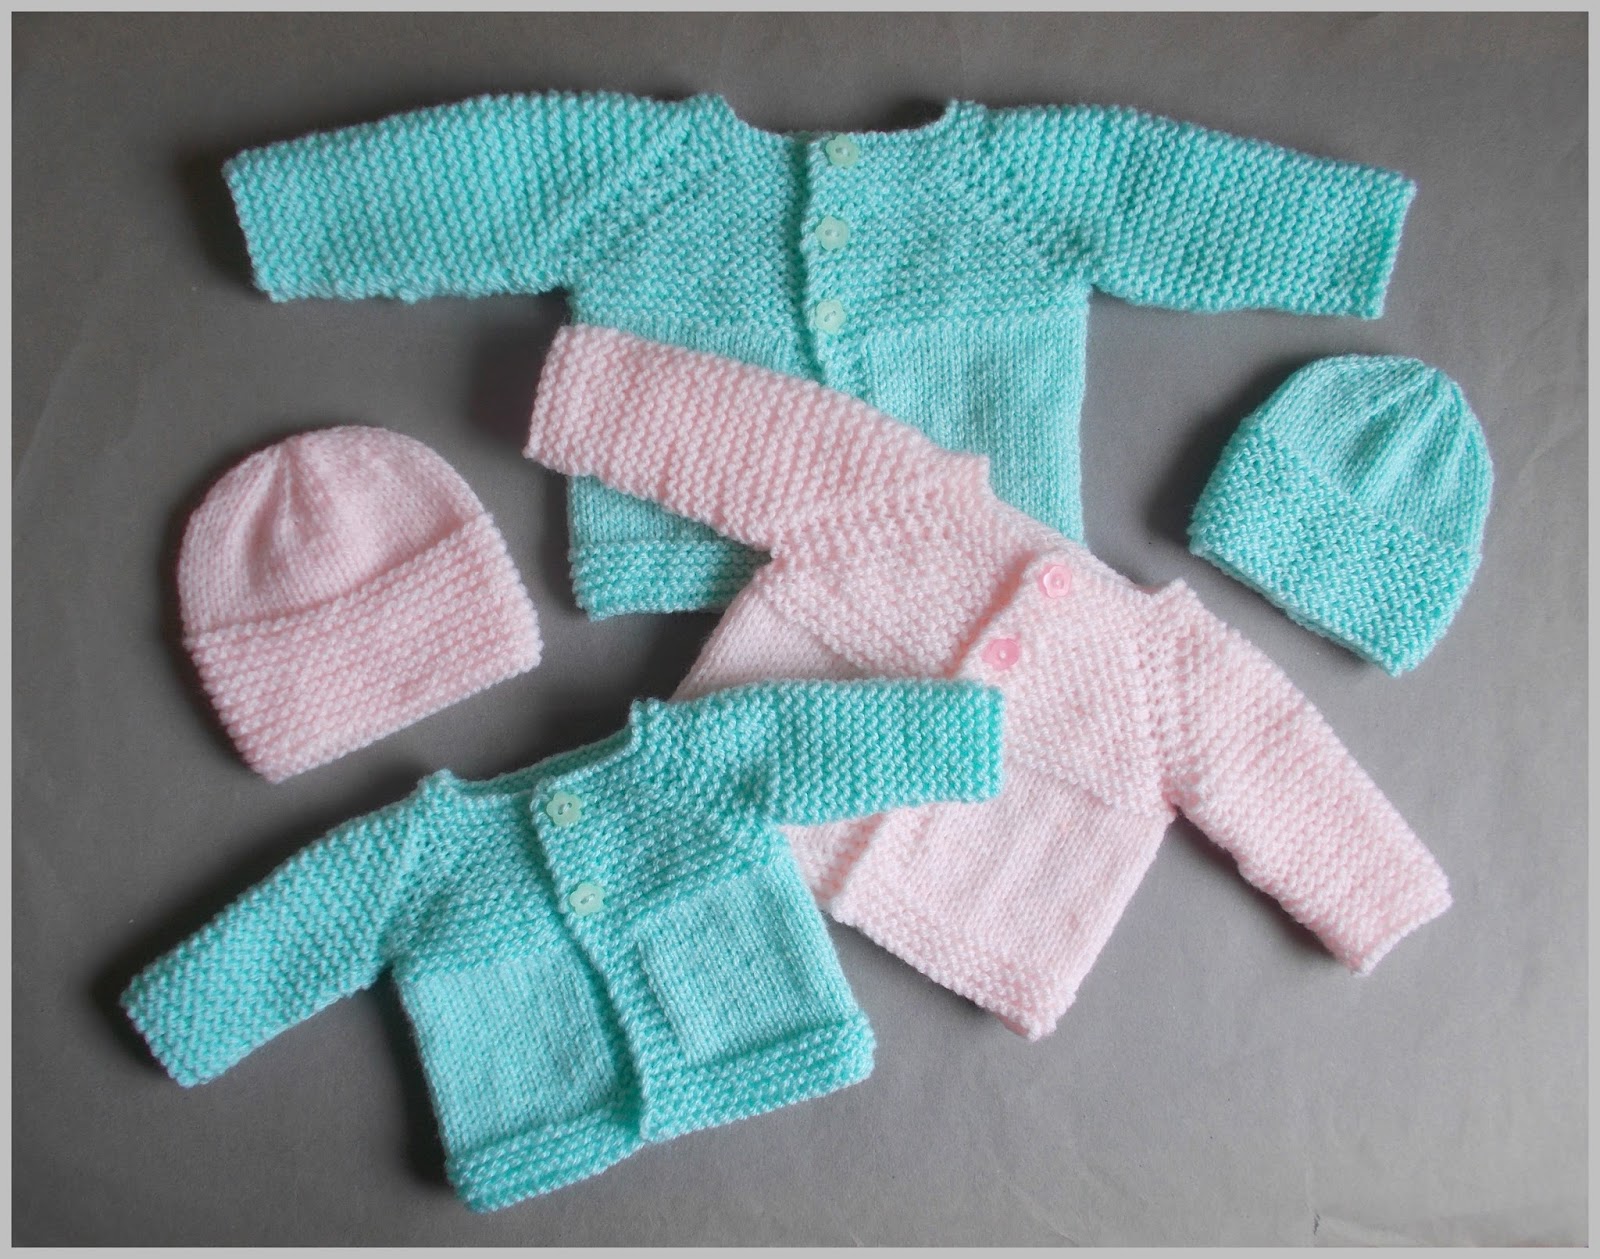 Miss Julia's Patterns Free Patterns Baby Sets & Outfits to Knit